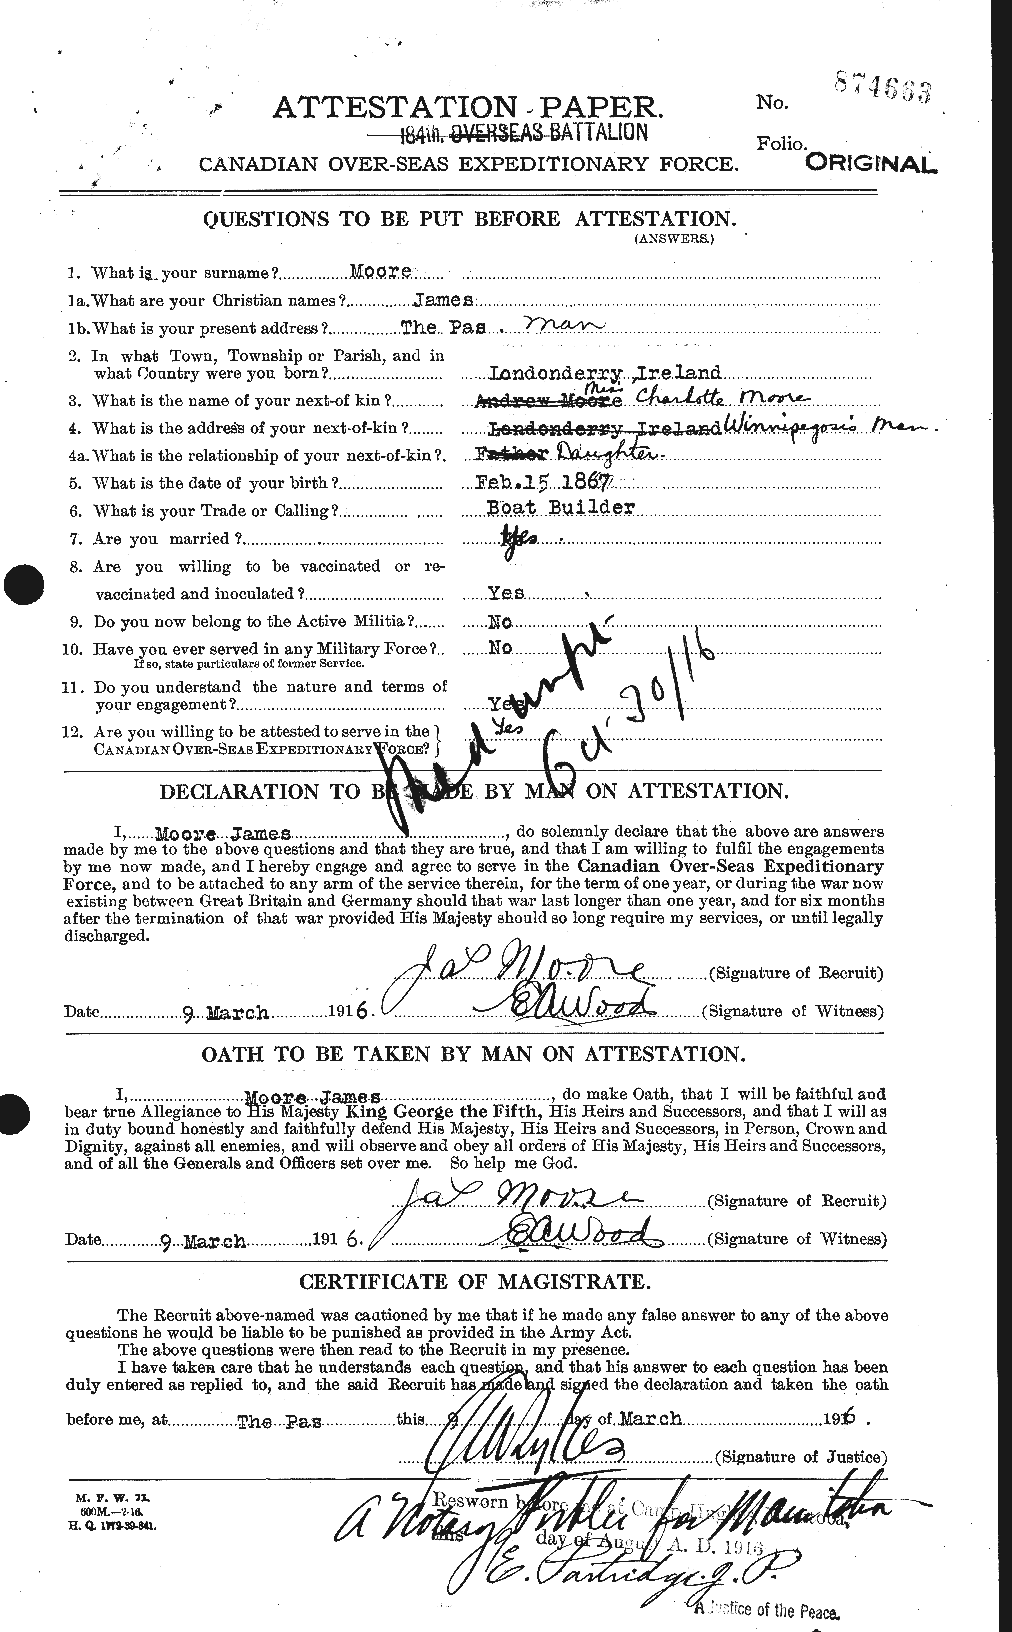 Personnel Records of the First World War - CEF 502172a